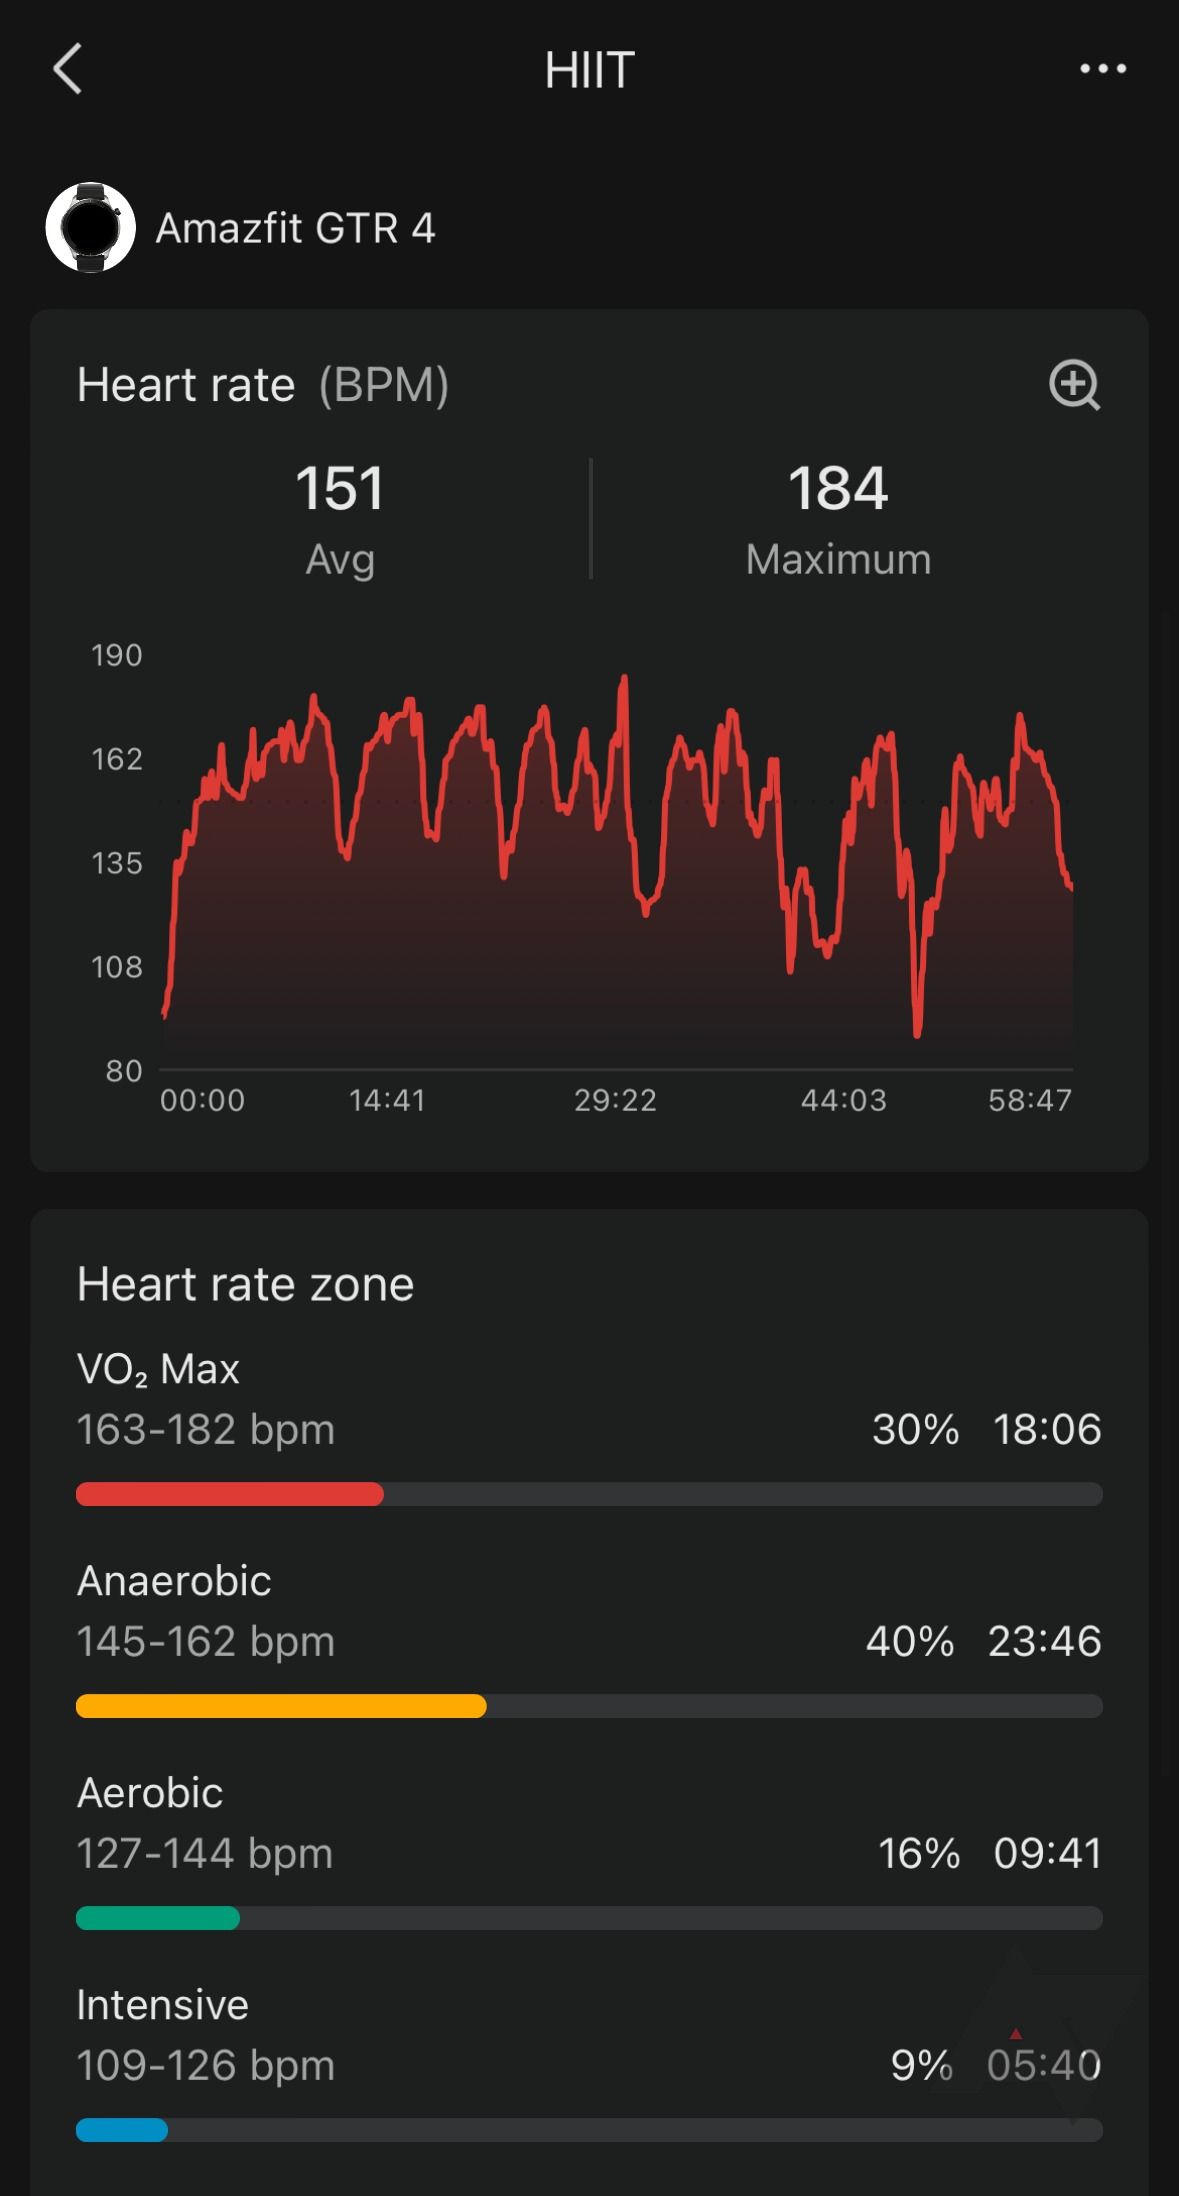 Amazfit's GTR 4 app, the workout section